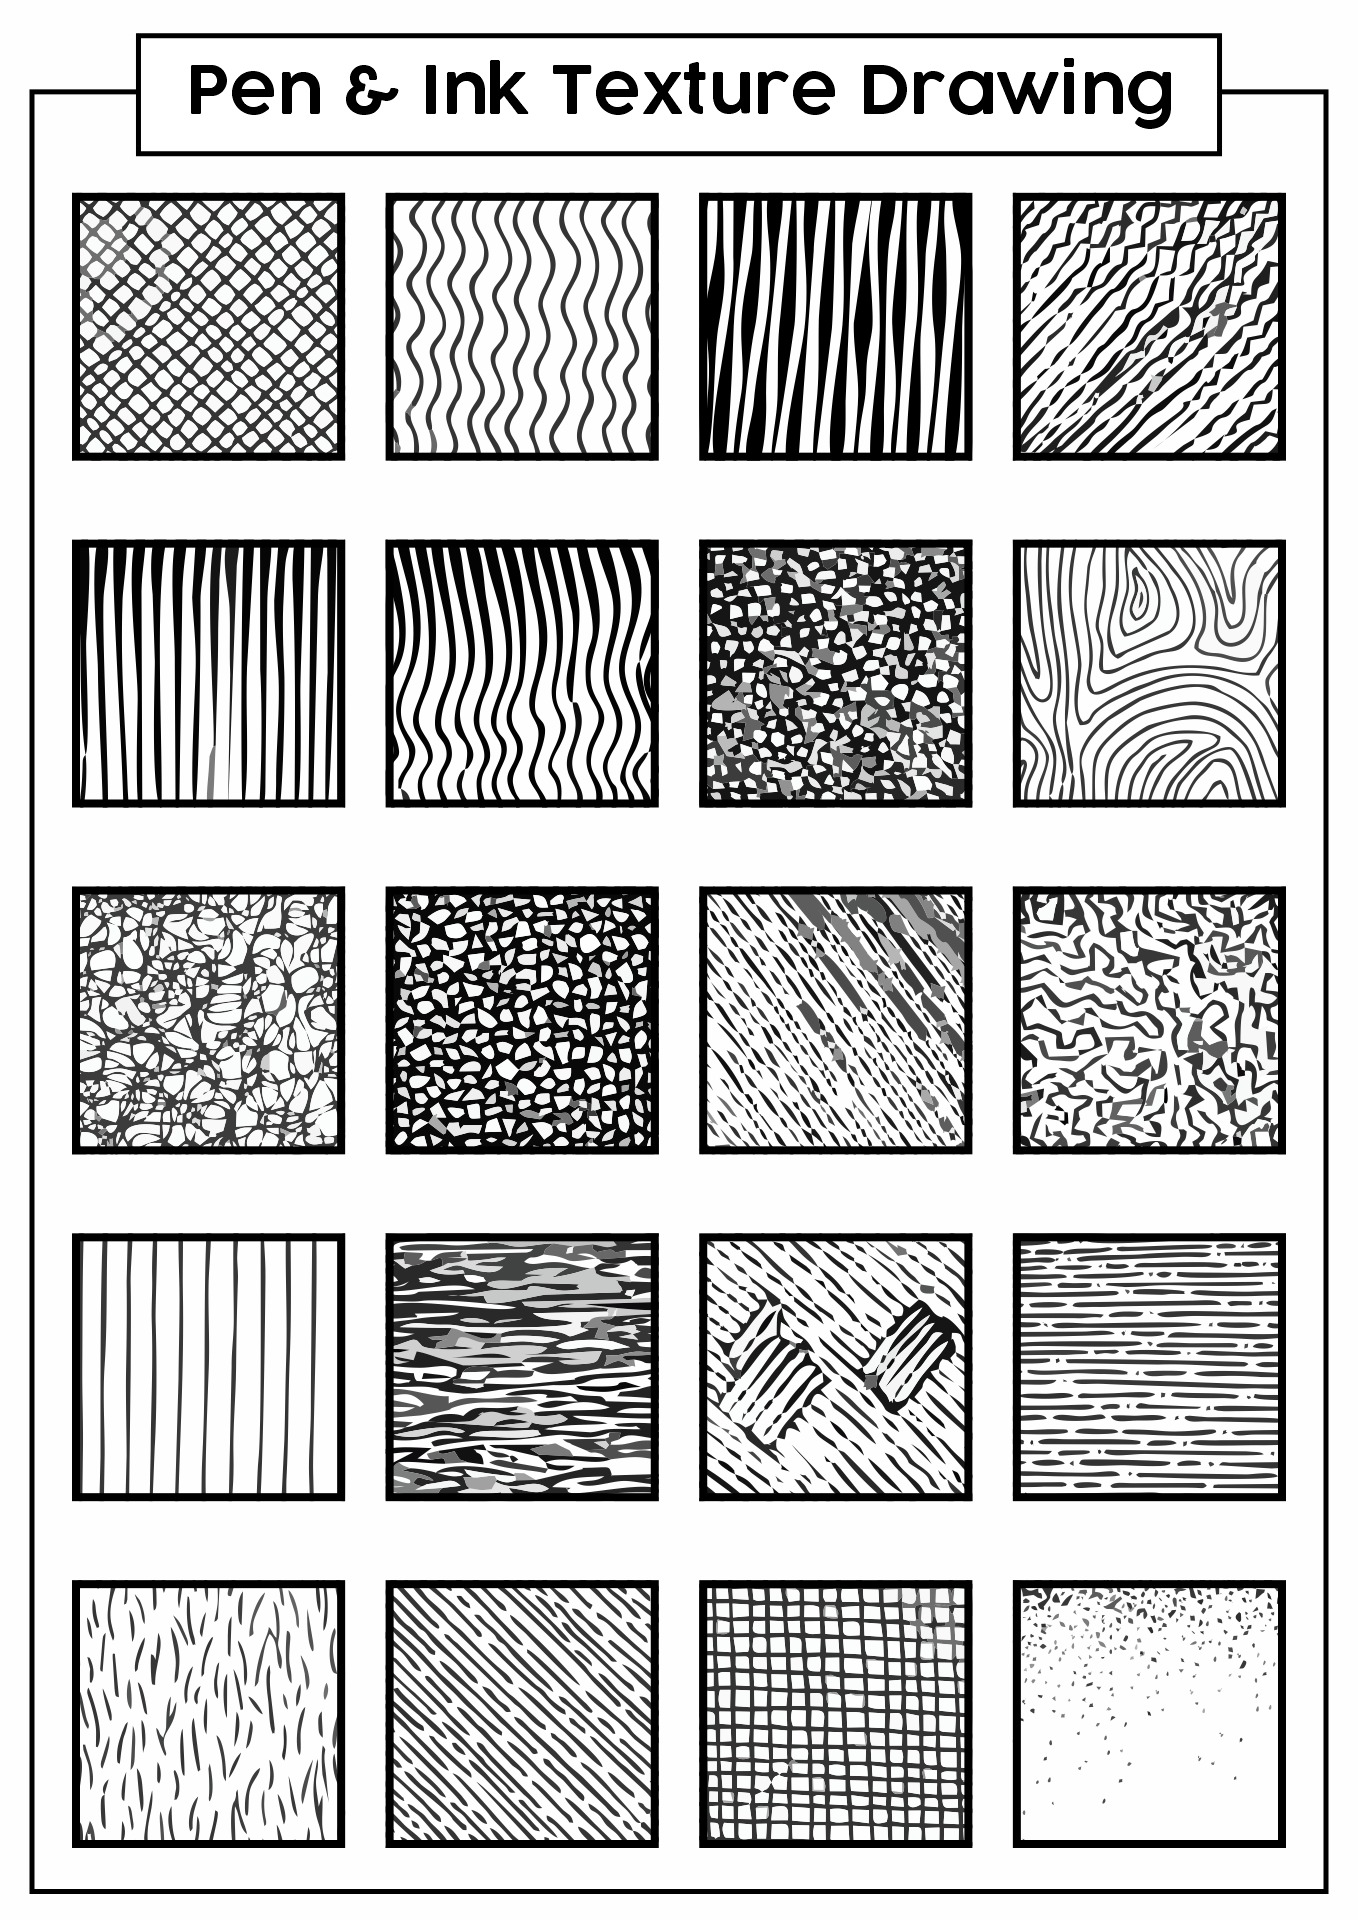 Pen and Ink Texture Worksheet Image